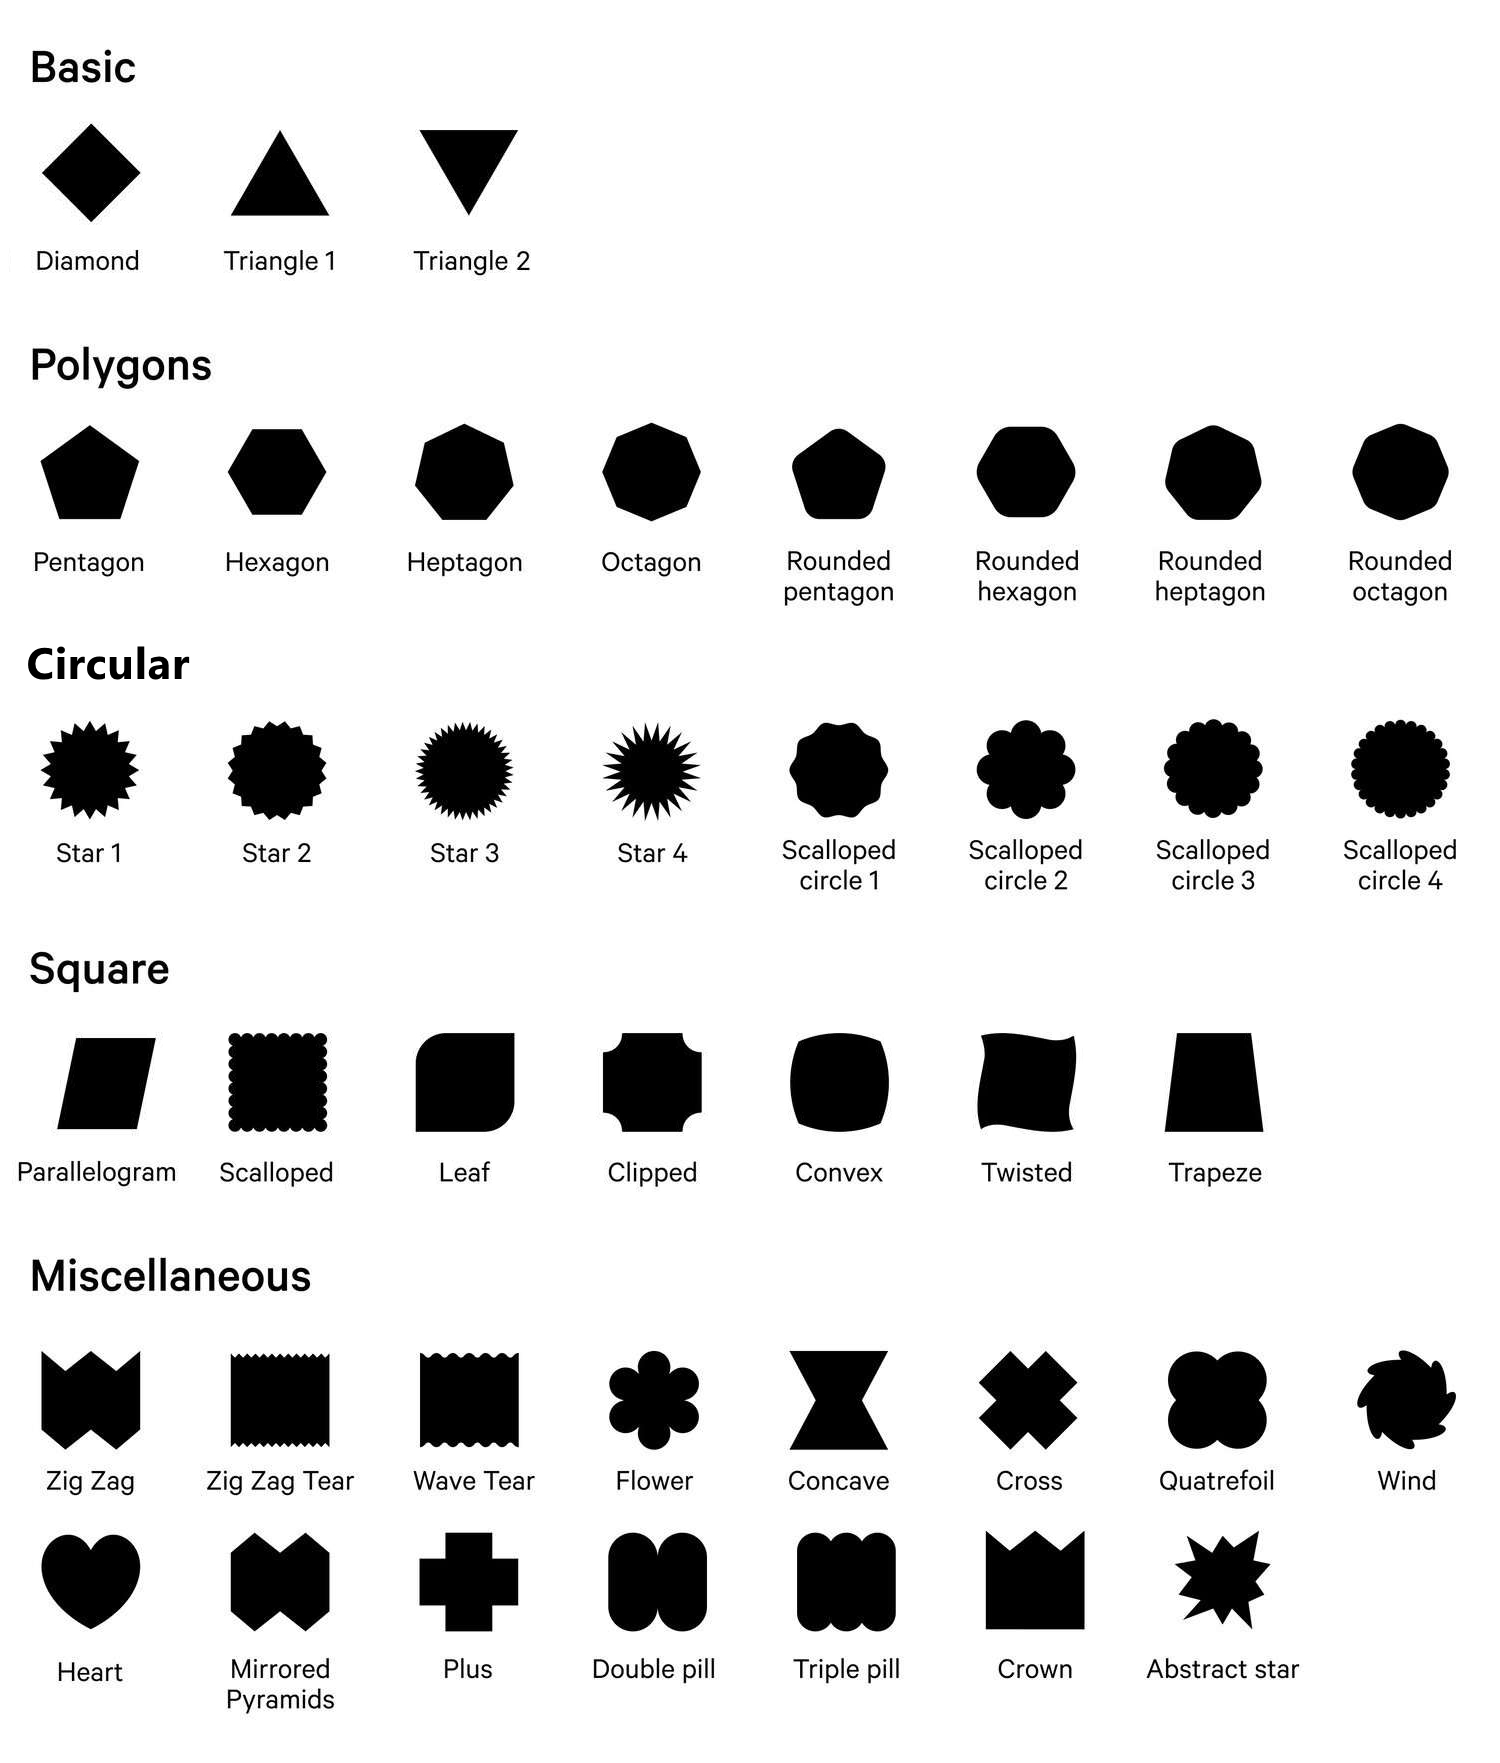 All non-Fit-to-image shape-types.